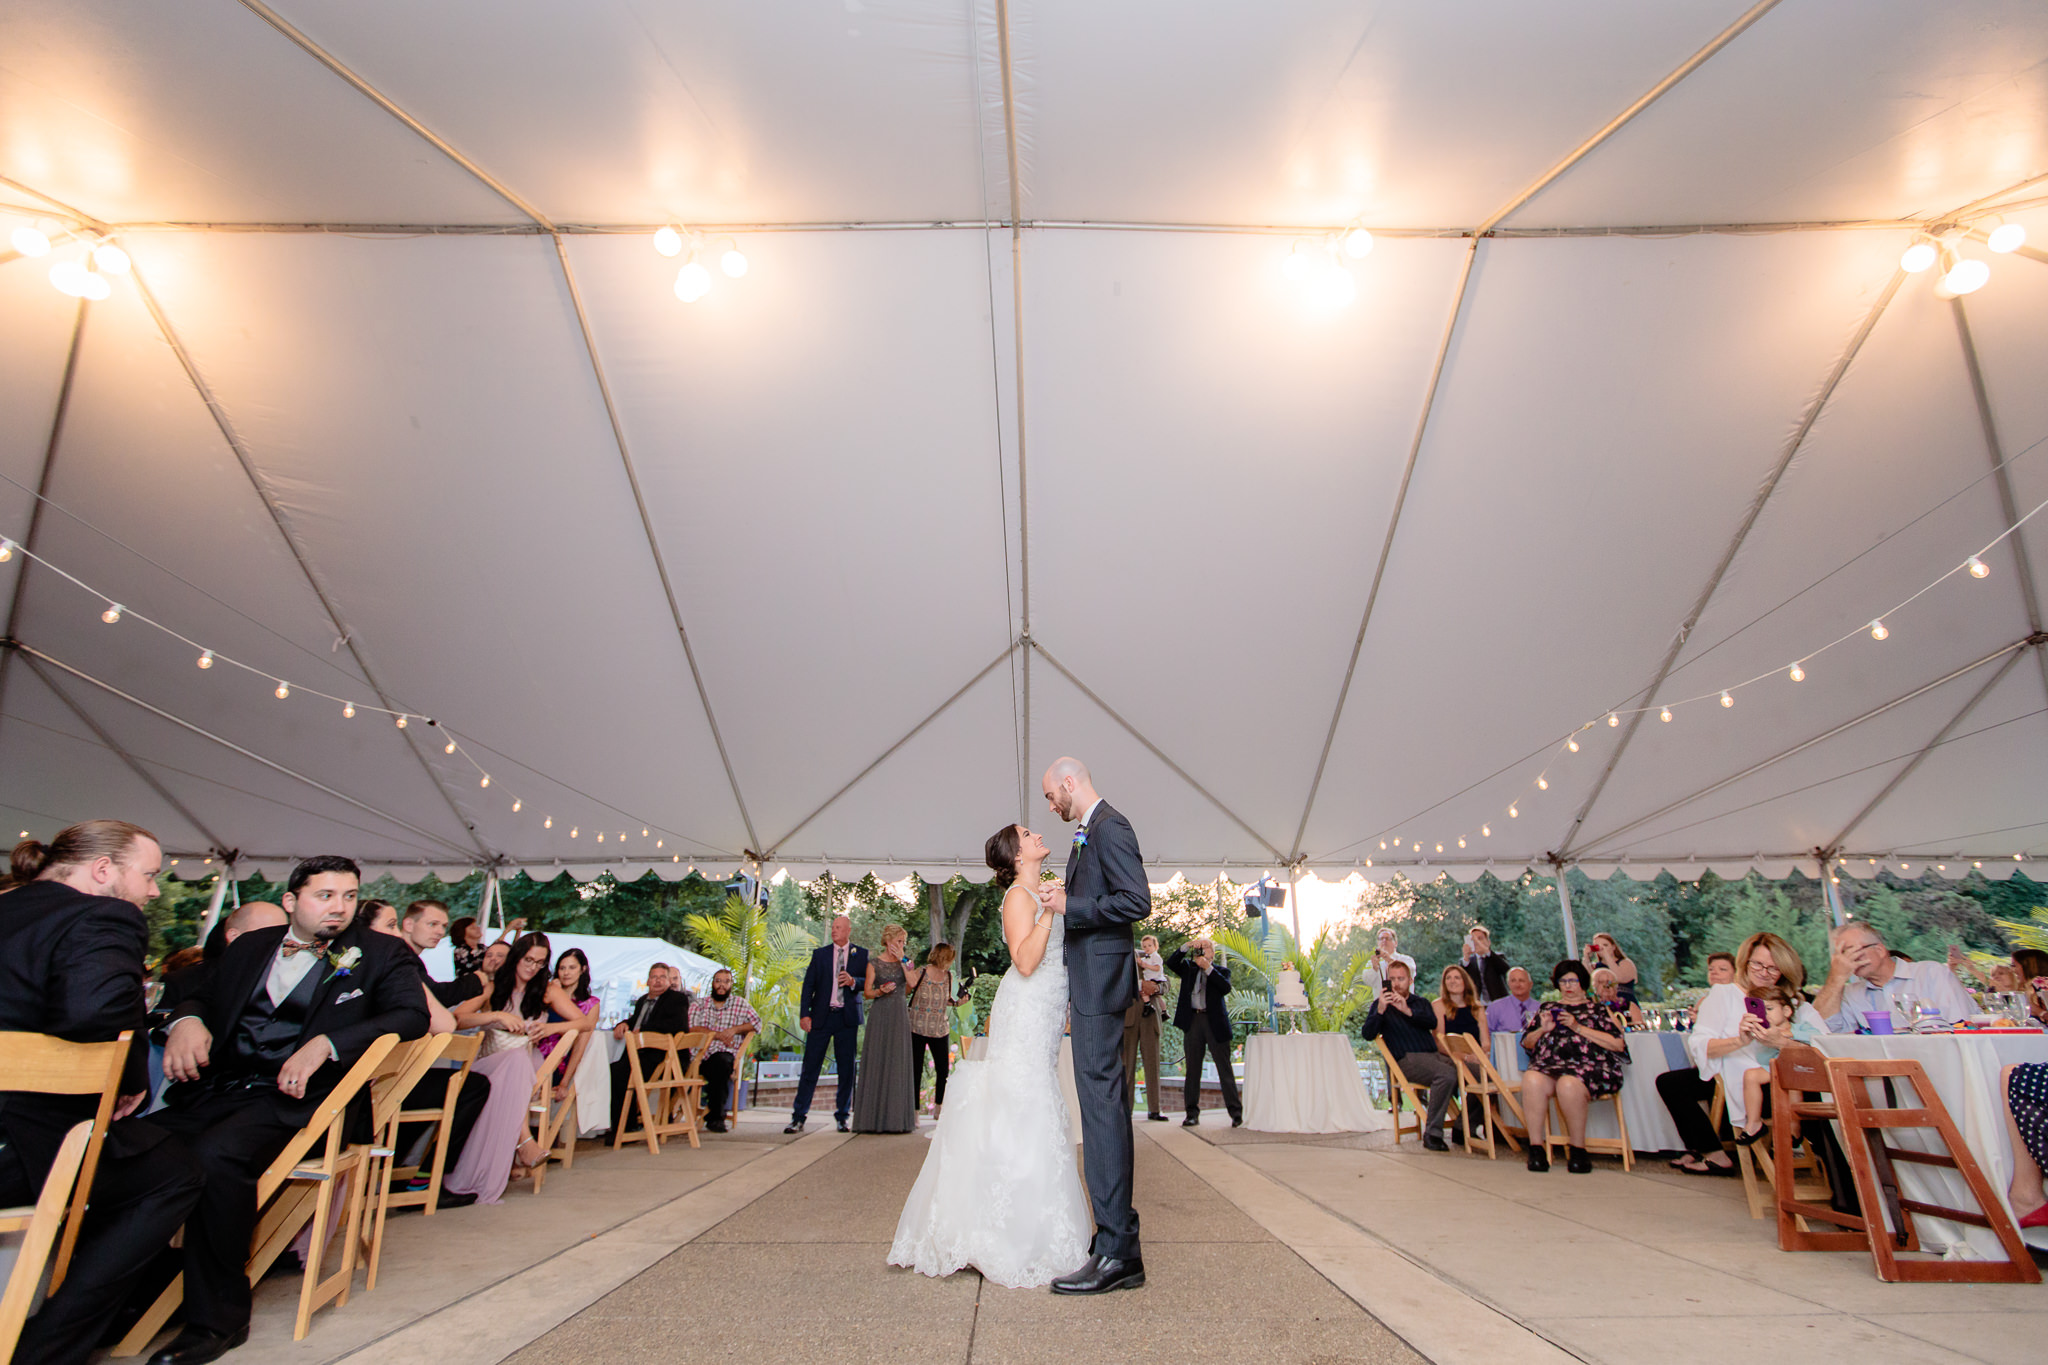 Newlyweds' first dance at the National Aviary